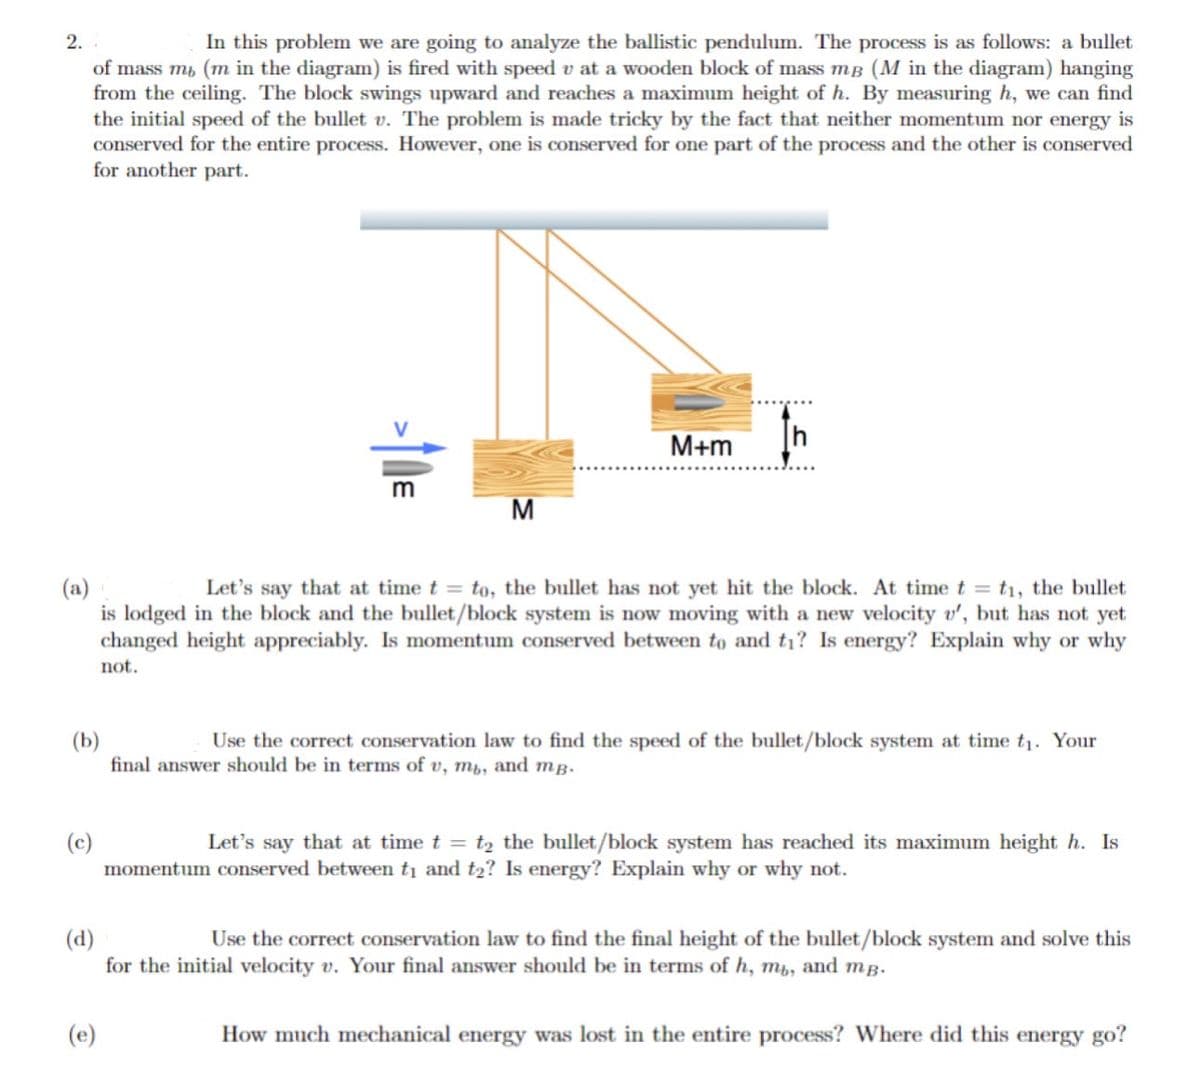 2.
In this problem we are going to analyze the ballistic pendulum. The process is as follows: a bullet
of mass m, (m in the diagram) is fired with speed v at a wooden block of mass m3 (M in the diagram) hanging
from the ceiling. The block swings upward and reaches a maximum height of h. By measuring h, we can find
the initial speed of the bullet v. The problem is made tricky by the fact that neither momentum nor energy is
conserved for the entire process. However, one is conserved for one part of the process and the other is conserved
for another part.
>↑DE
(c)
M
(a)
Let's say that at time t = to, the bullet has not yet hit the block. At time t = ti, the bullet
is lodged in the block and the bullet/block system is now moving with a new velocity v', but has not yet
changed height appreciably. Is momentum conserved between to and t₁? Is energy? Explain why or why
not.
M+m
(b)
Use the correct conservation law to find the speed of the bullet/block system at time t₁. Your
final answer should be in terms of v, mu, and mp.
(e)
Let's say that at time t = t₂ the bullet/block system has reached its maximum height h. Is
momentum conserved between t₁ and t₂? Is energy? Explain why or why not.
(d)
Use the correct conservation law to find the final height of the bullet/block system and solve this
for the initial velocity v. Your final answer should be in terms of h, mu, and mp.
How much mechanical energy was lost in the entire process? Where did this energy go?